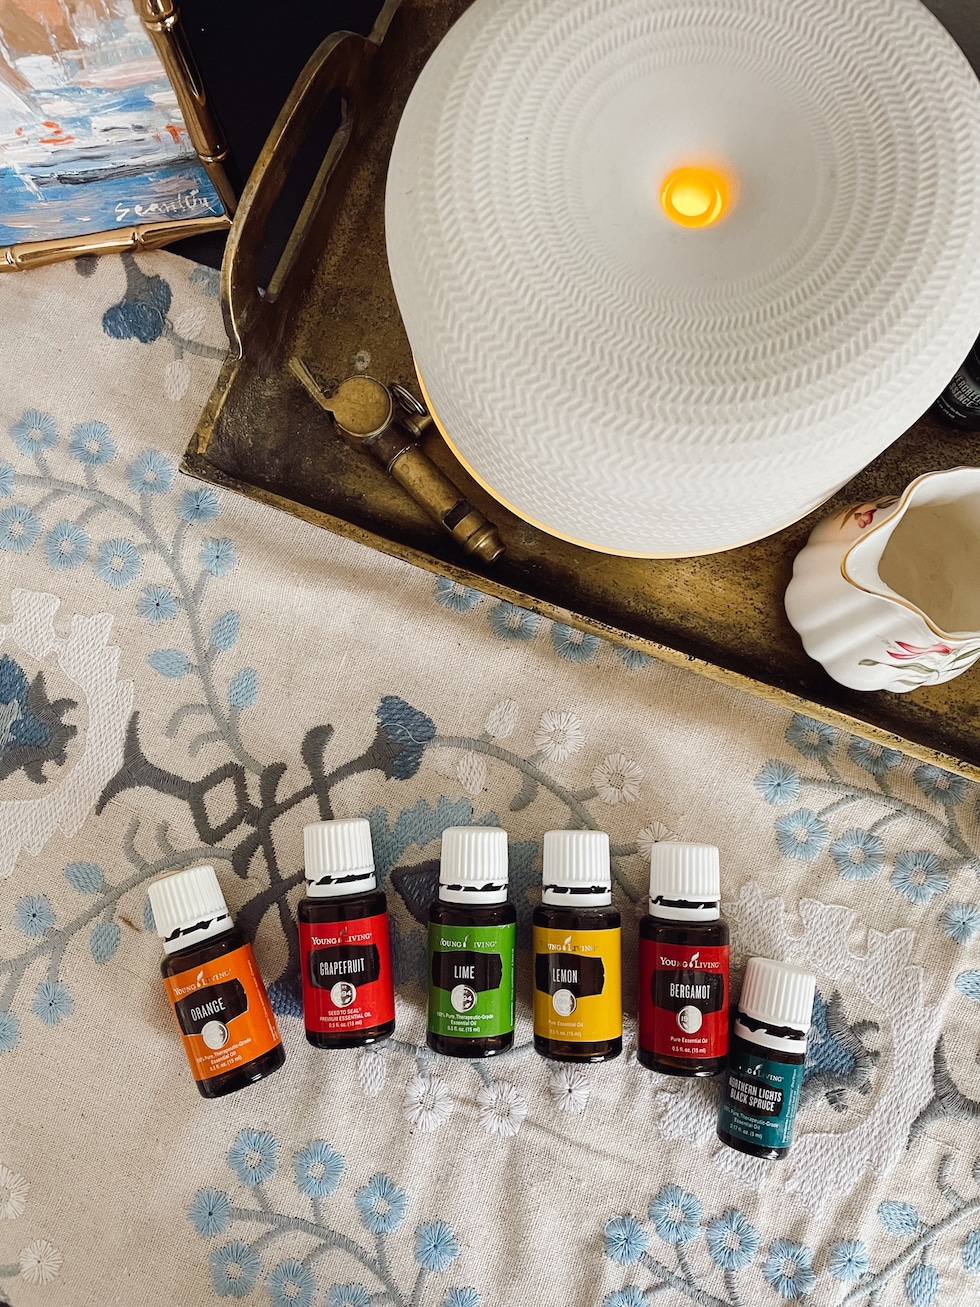 Weathering Winter with Essential Oils (+ my Anthropologie Inspired Recipe)